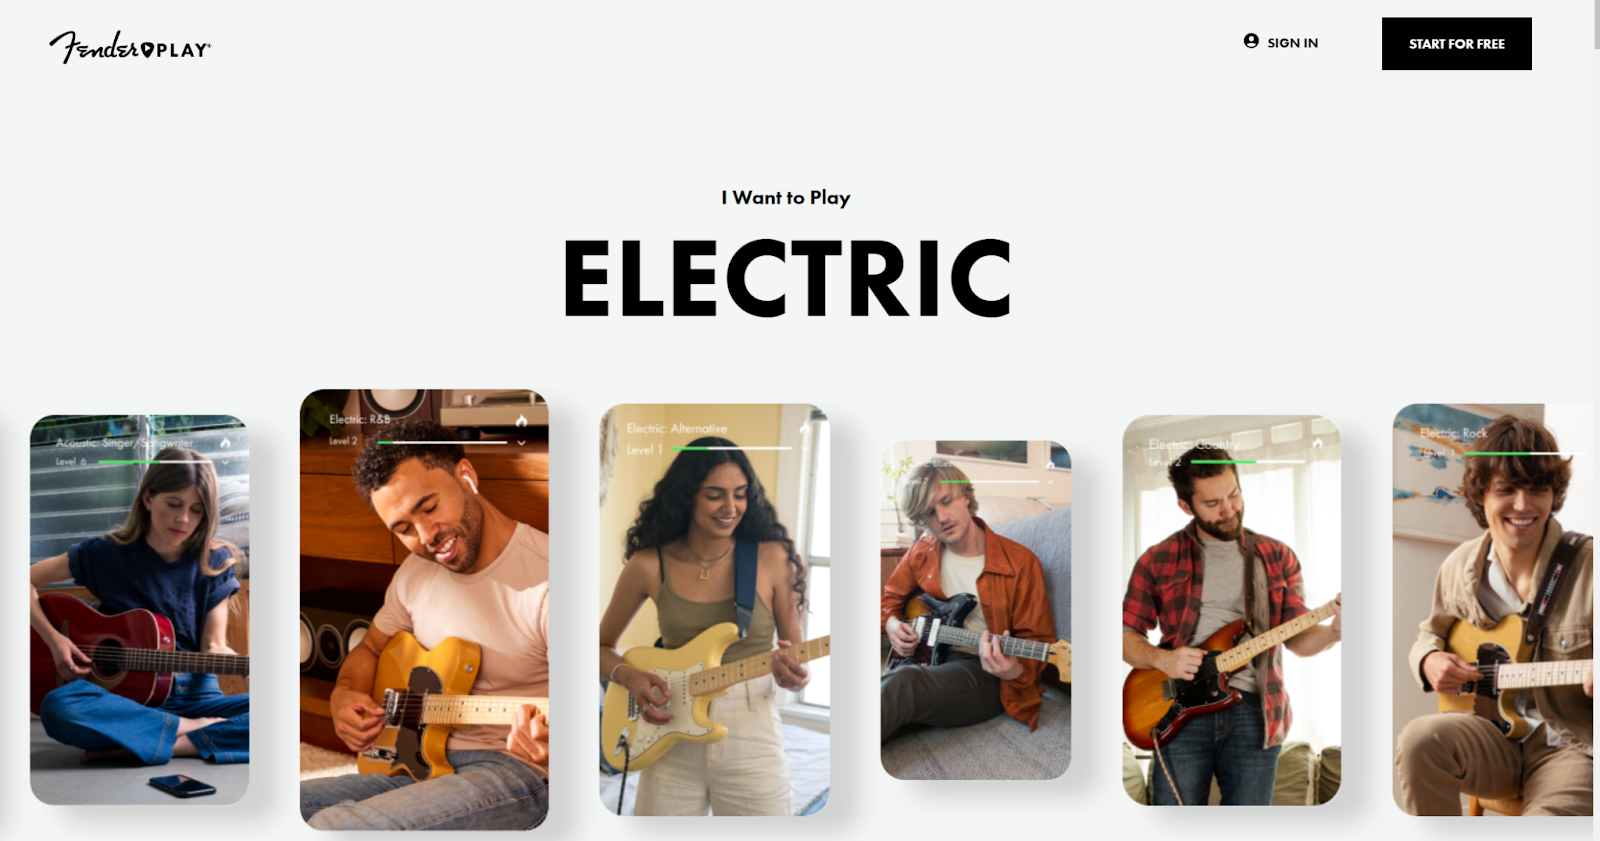 Fender play website home page